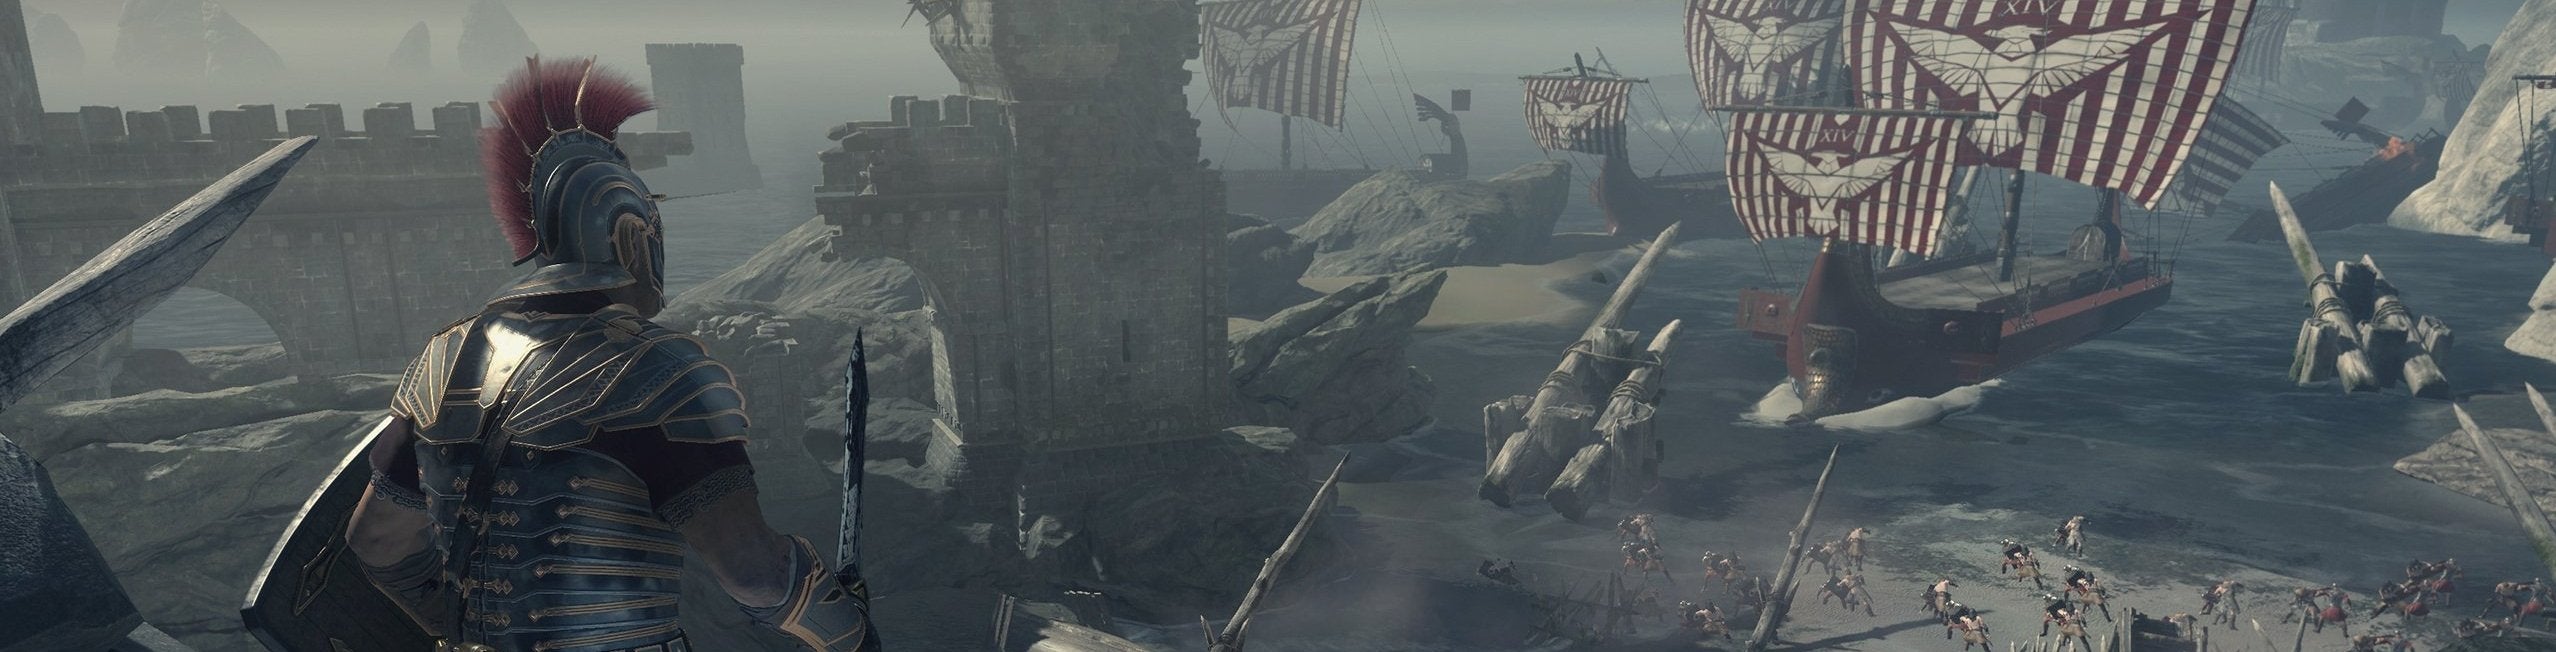 Image for Face-Off: Ryse on PC